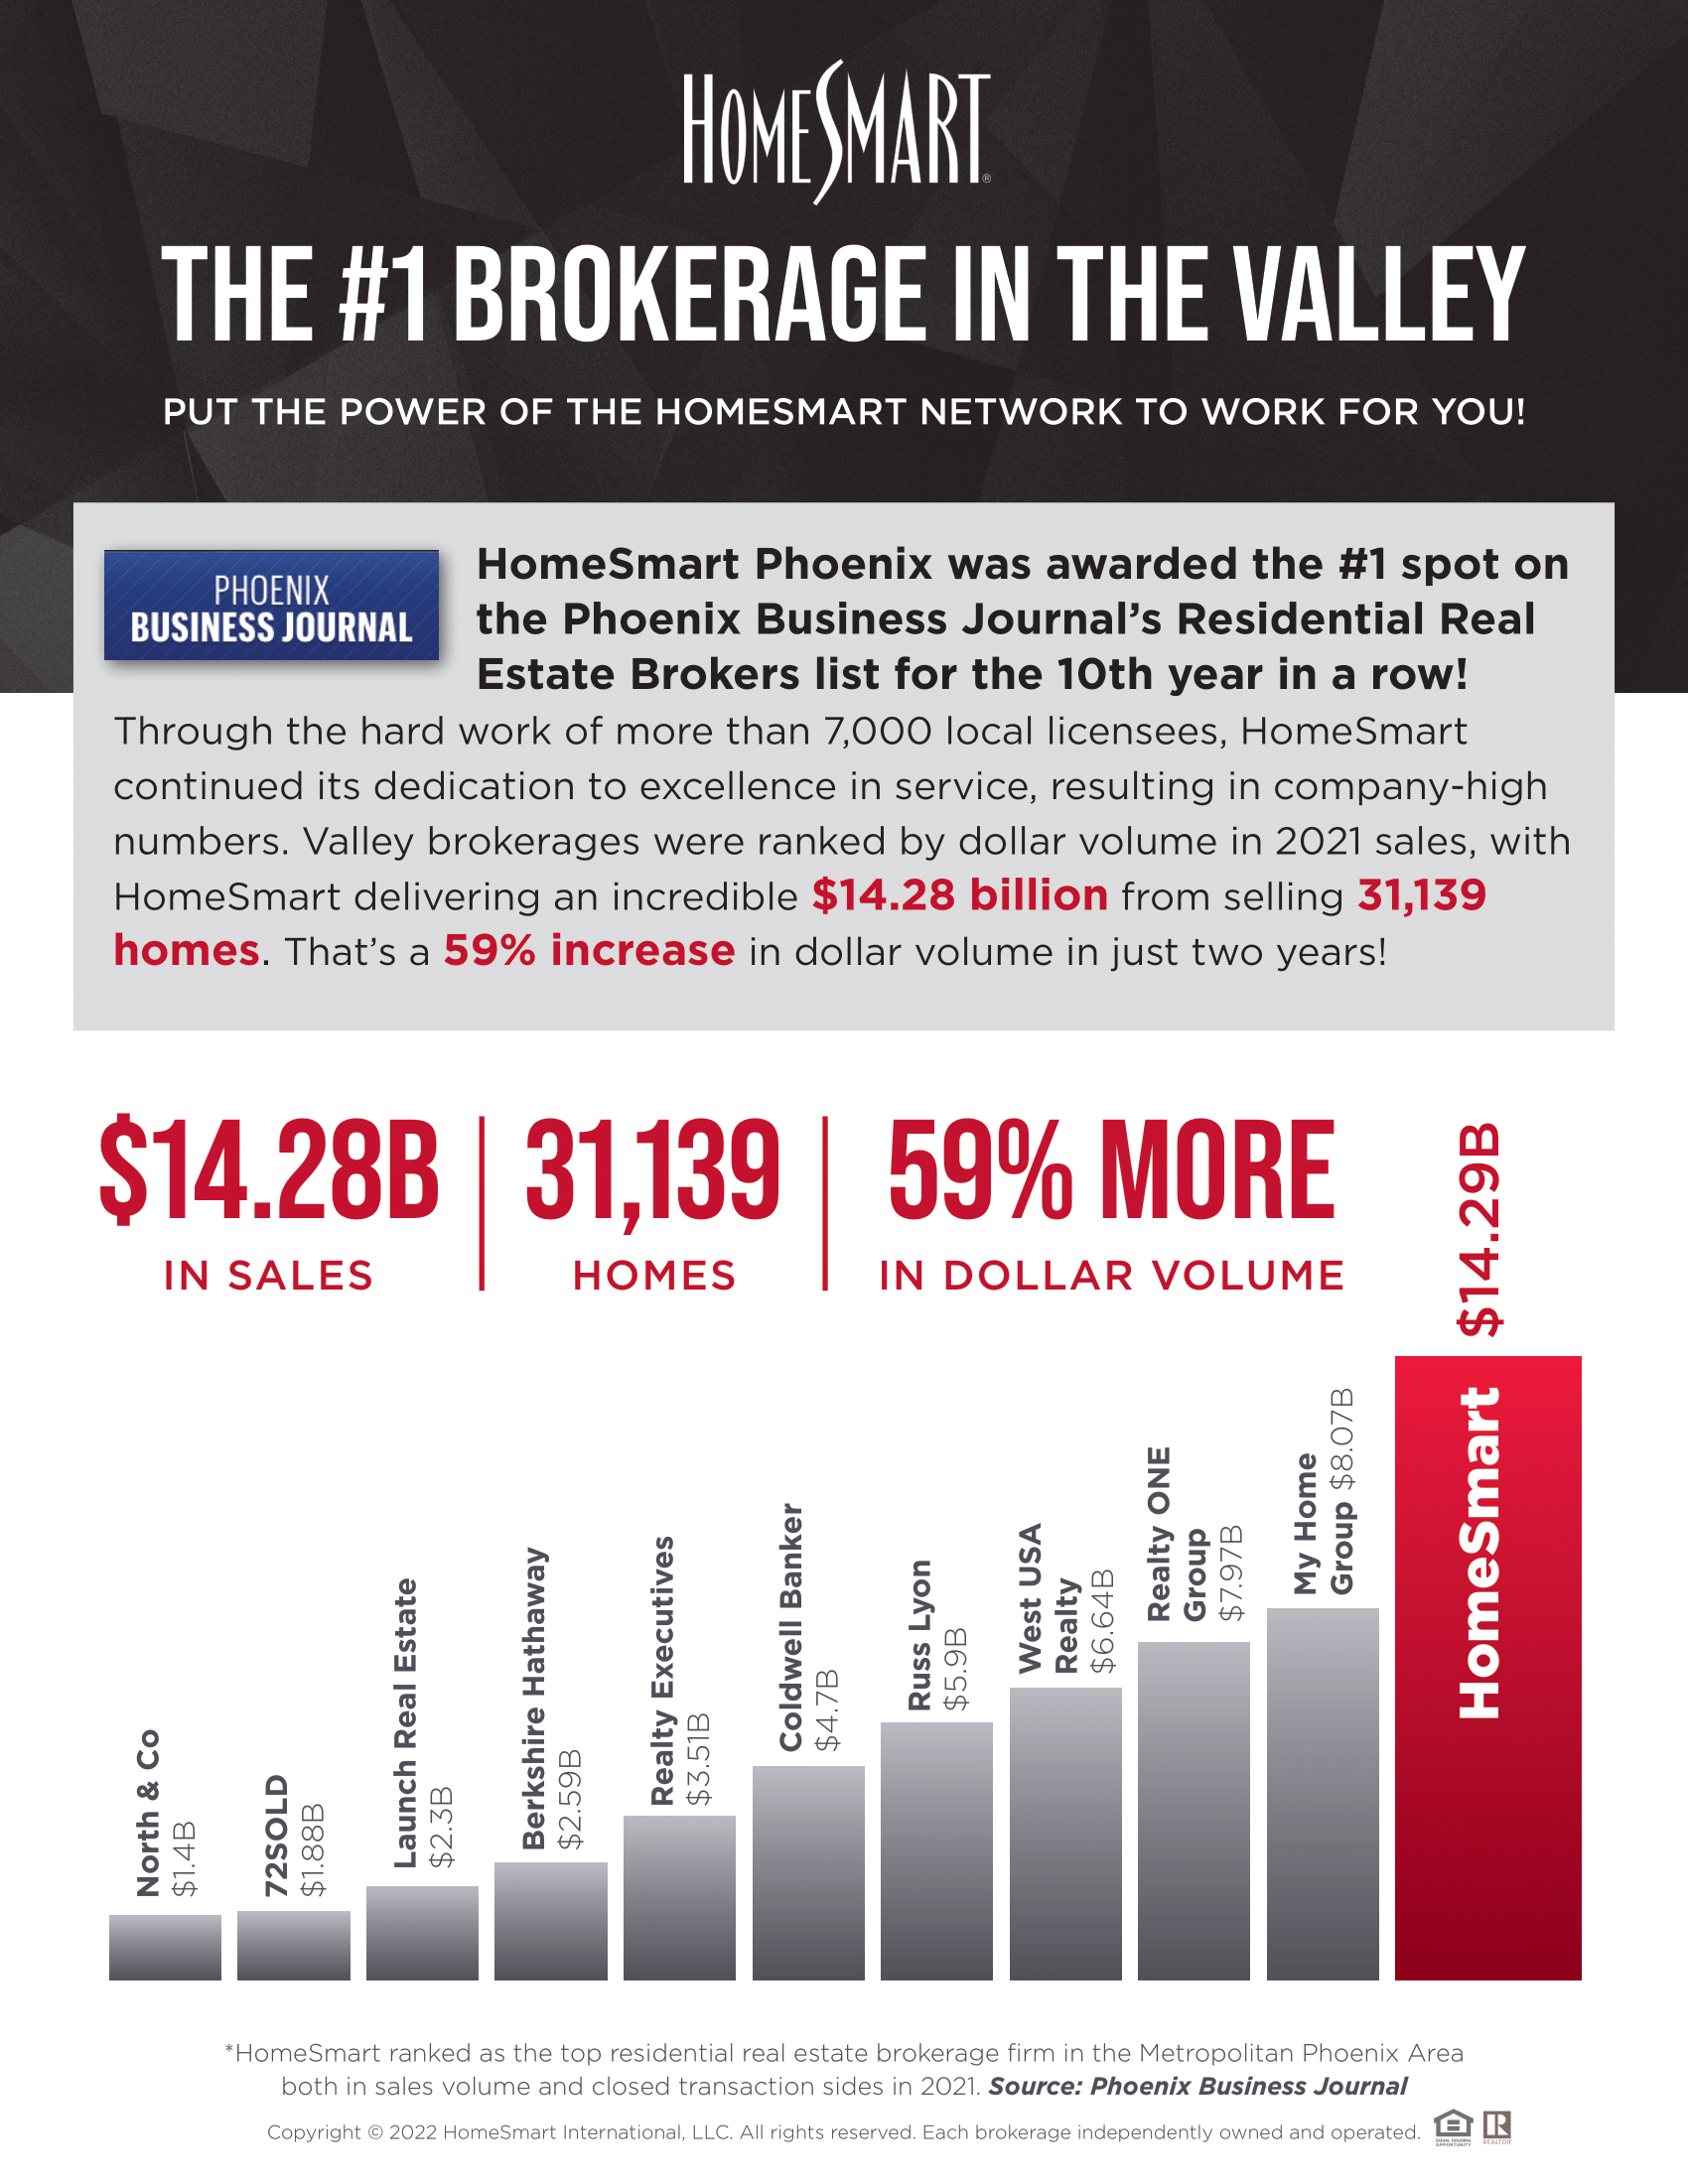 #1 BROKERAGE IN THE VALLEY